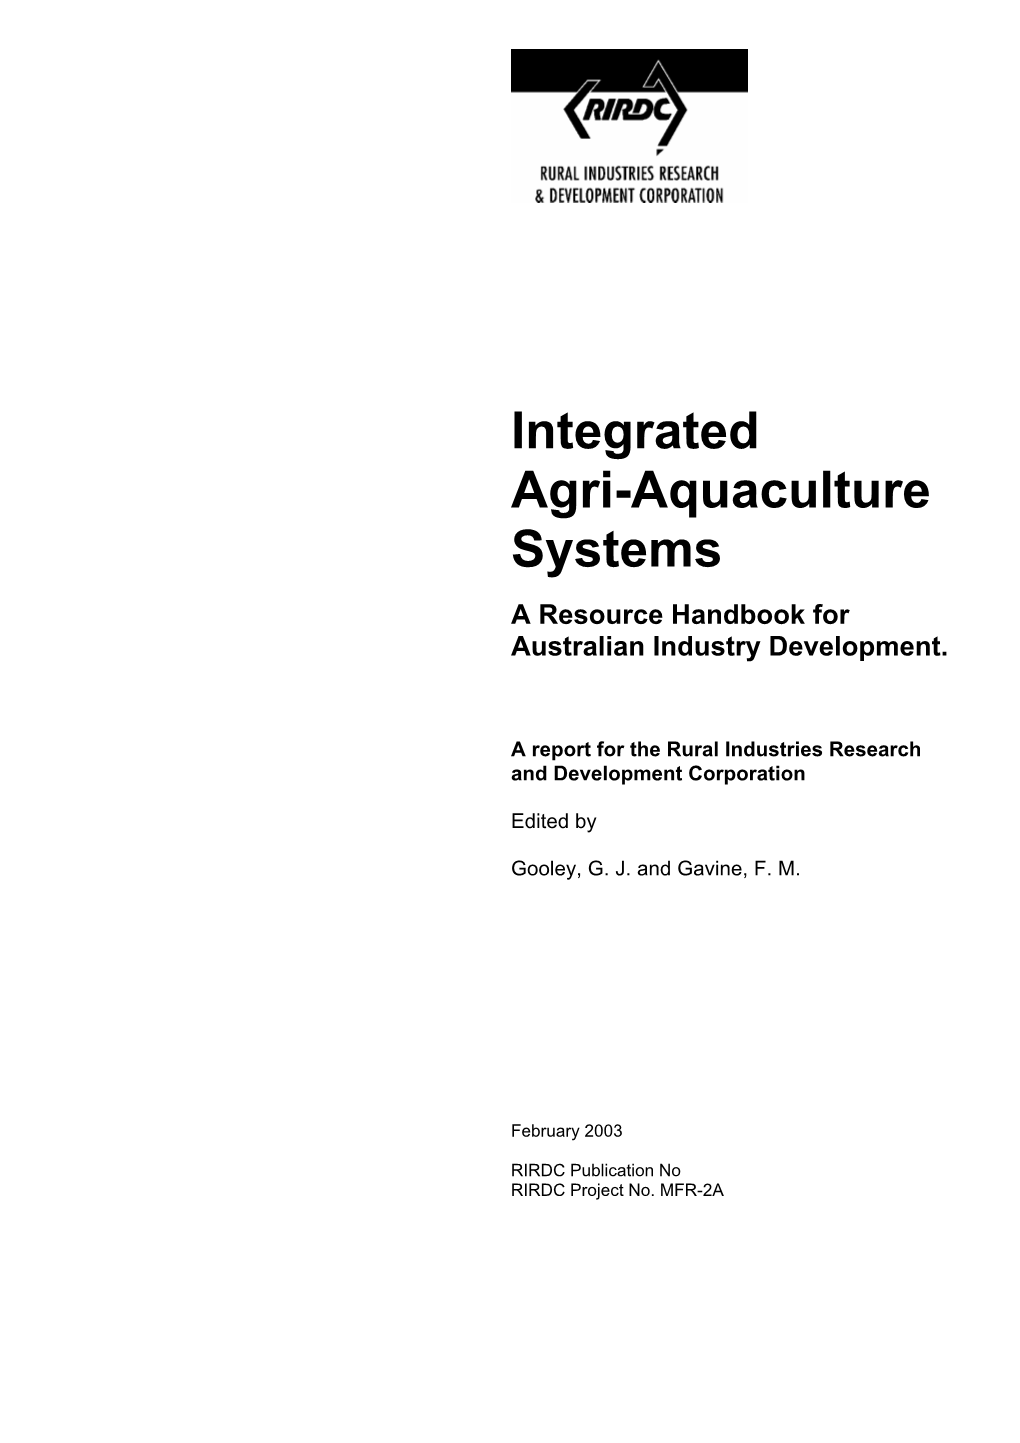 Integrated Agri-Aquaculture Systems a Resource Handbook for Australian Industry Development